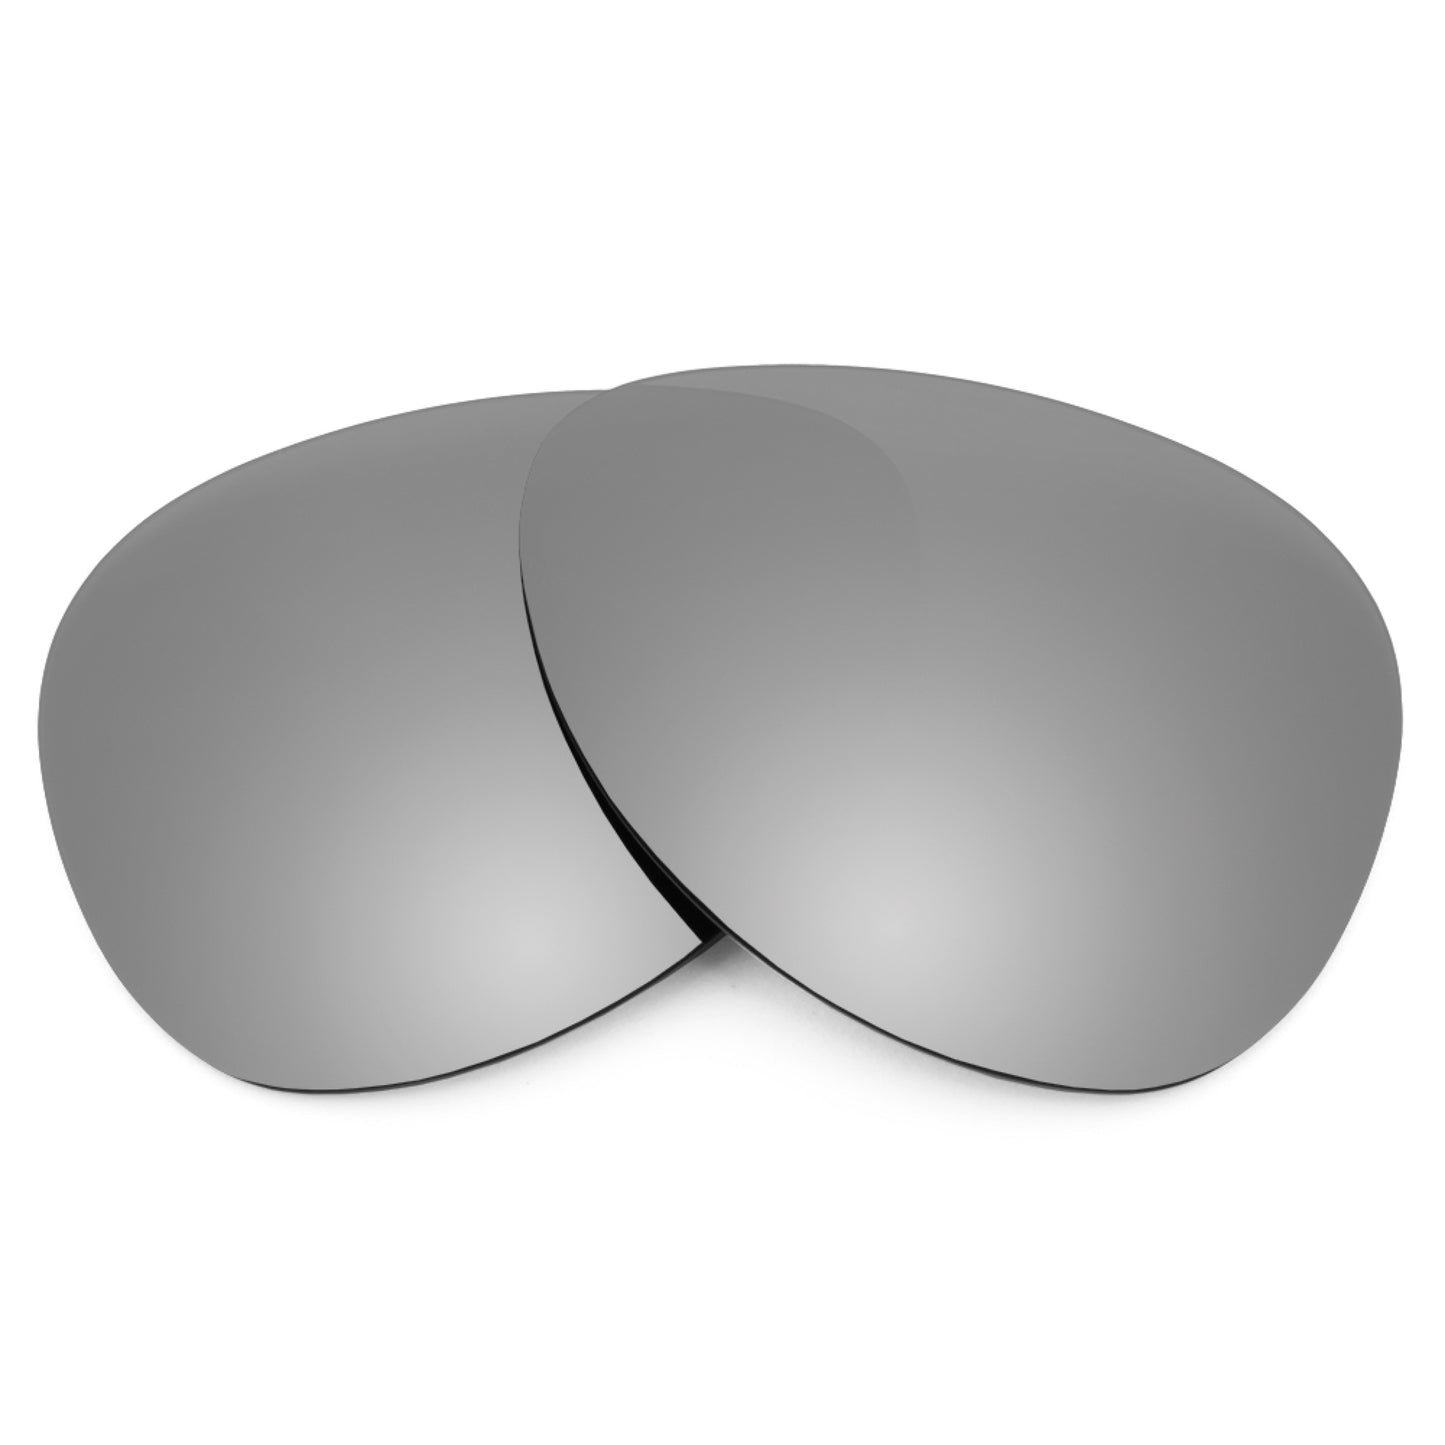 Revant replacement lenses for Ray-Ban RB4189 64mm Non-Polarized Titanium